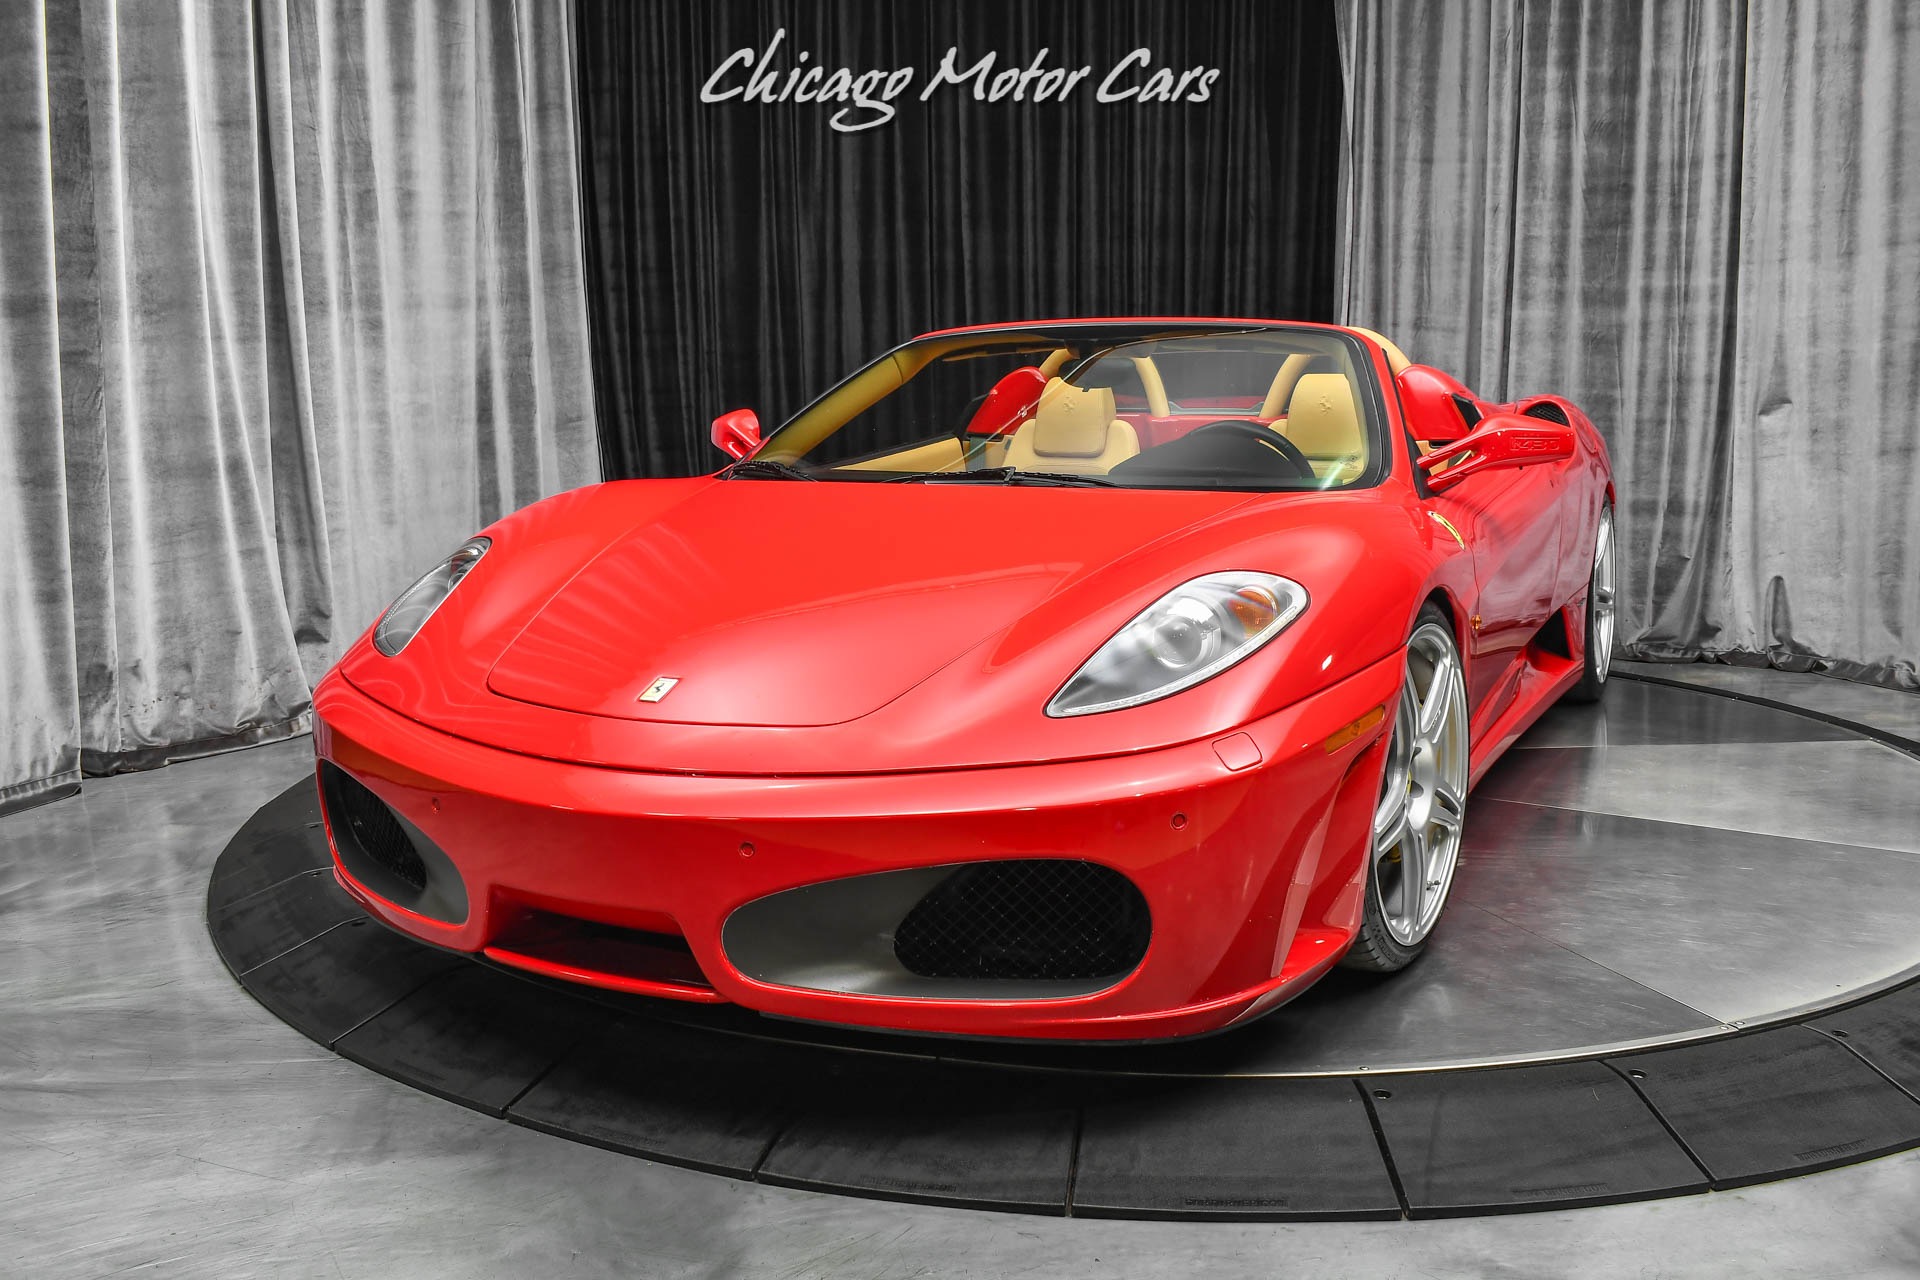 Used 2007 Ferrari F430 F1 Spider Daytona Seats! HRE Wheels! Race Exhaust!  Full Front PPF! For Sale (Special Pricing) | Chicago Motor Cars Stock #18816